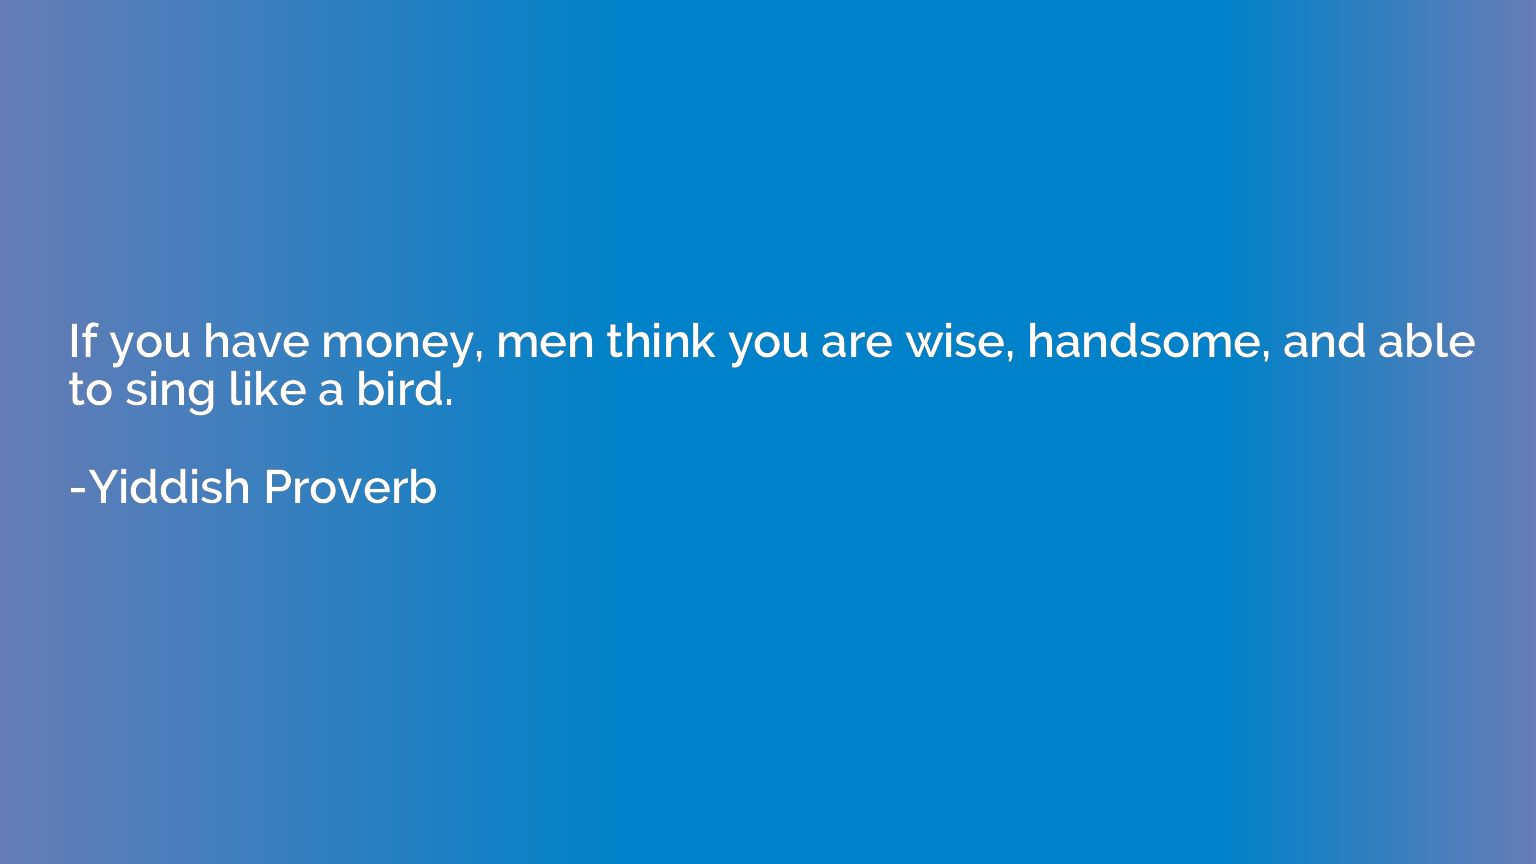 If you have money, men think you are wise, handsome, and abl